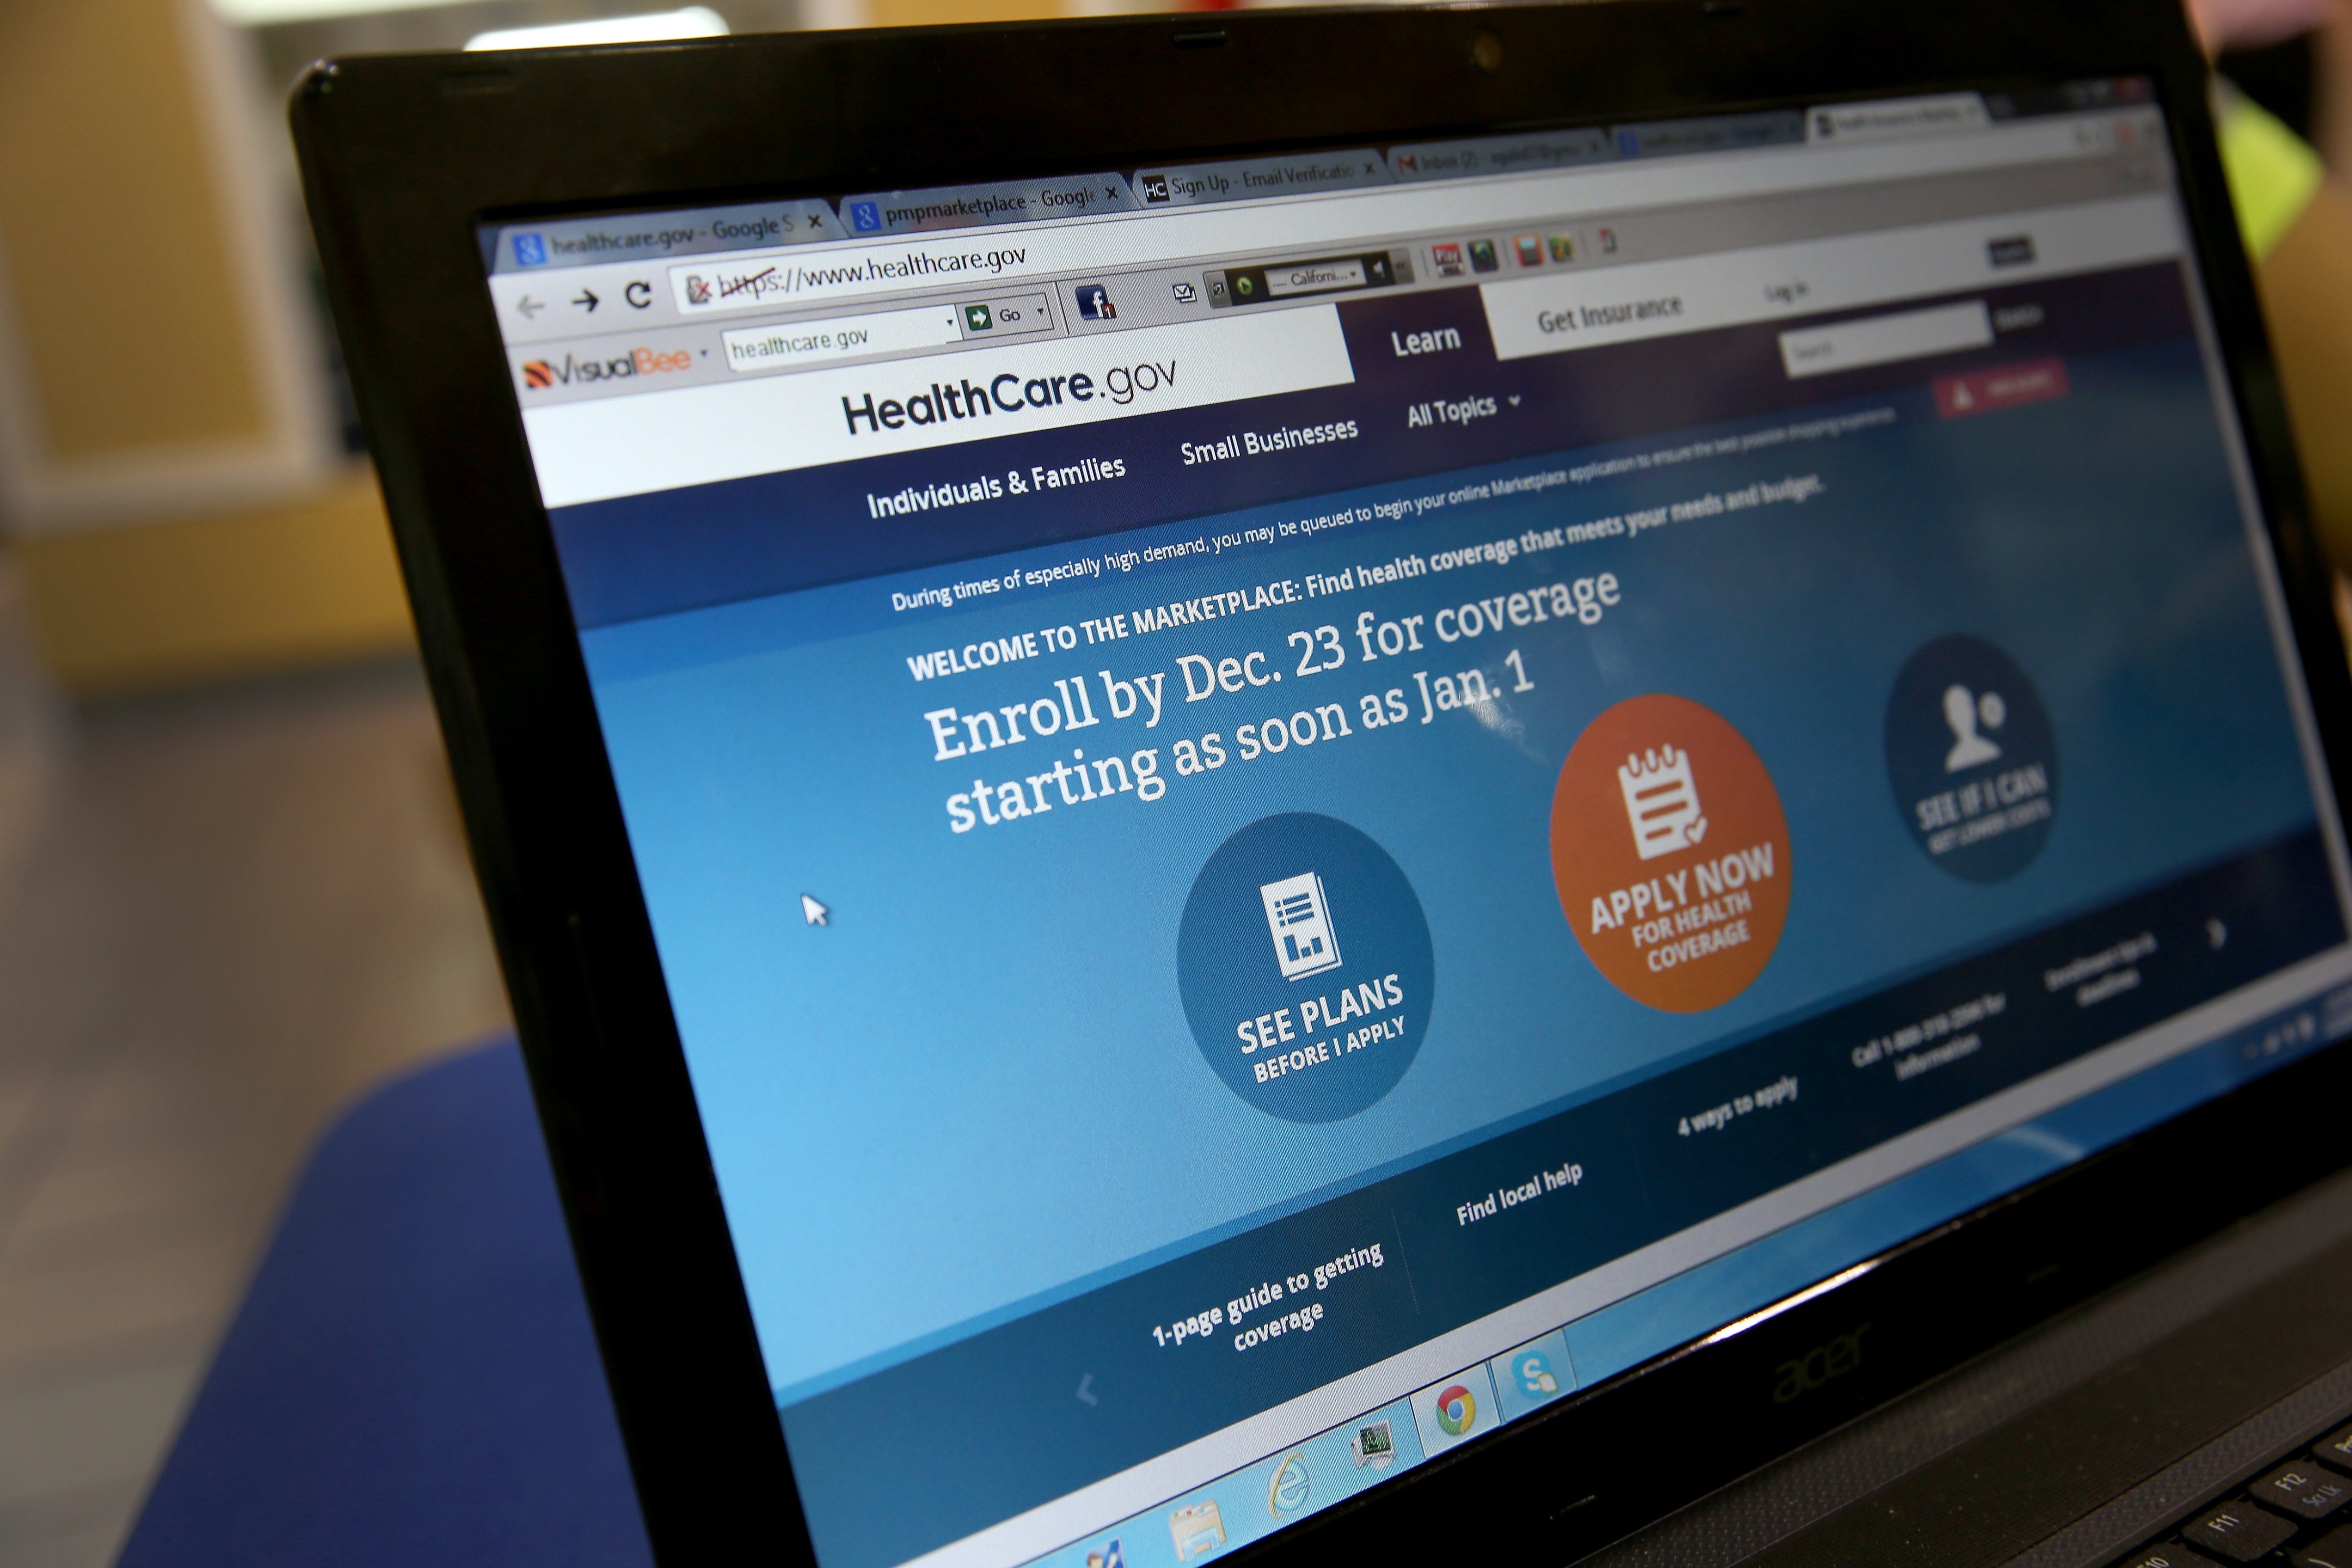 A computer screen reads, "Enroll by Dec. 23 for coverage starting as soon as Jan 1." as agents from Sunshine Life and Health Advisors help people purchase health insurance under the Affordable Care Act at the kiosk setup at the Mall of Americas on December 22, 2013 in Miami, Florida. (Joe Raedle&mdash;Getty Images)